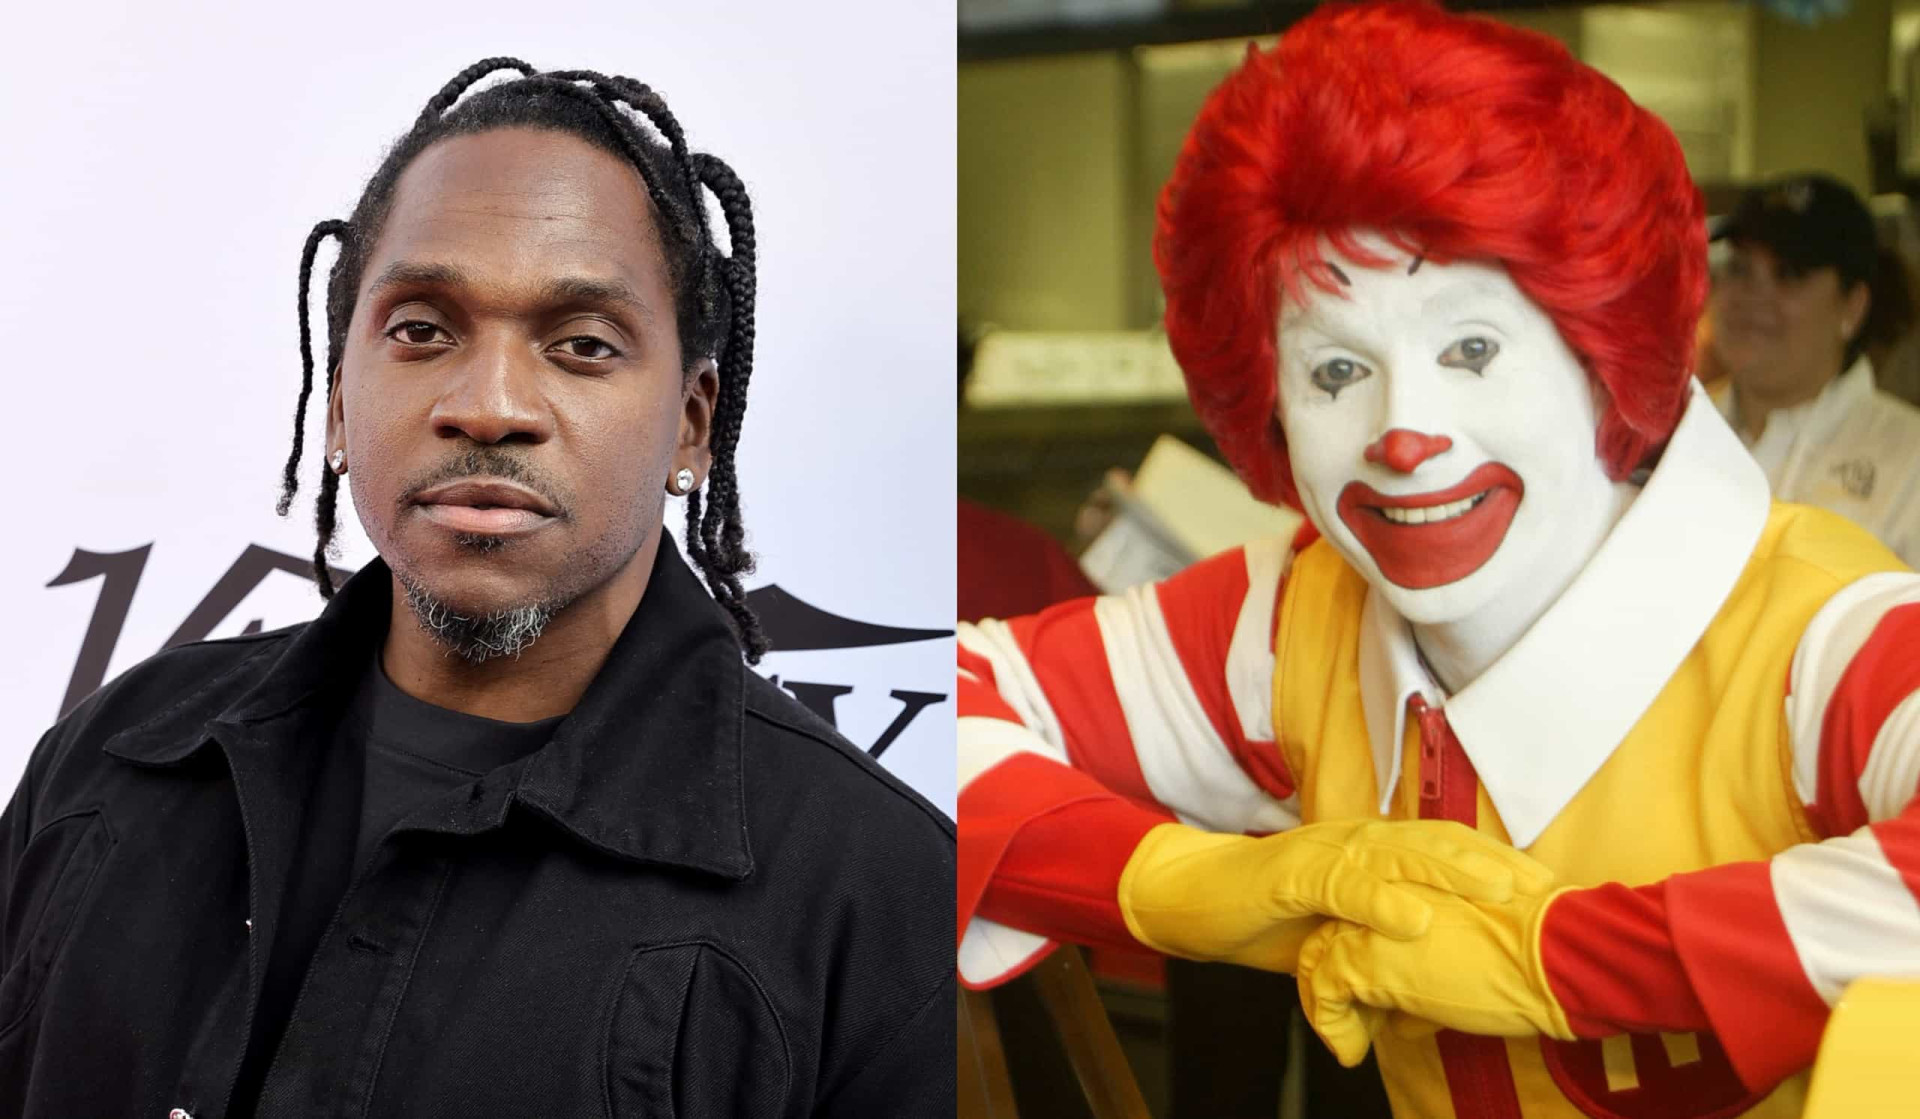 <p>It is not widely known that rapper Pusha T and his brother collaborated on the creation of the iconic McDonald's jingle, "I'm Lovin' It." In a retaliatory move for their insultingly poor compensation, Pusha joined forces with Arby's to release a diss track aimed at the fast-food giant.  Seeking retribution, the rapper aligned himself with Arby's to not only promote their Spicy Fish Sandwich but also to take down their competition. Accompanying the track, Pusha tweeted the hashtag "#ArbysPaidMeButIWouldSayThisAnyway," indicating that he was indeed compensated for his participation. Rolling Stone verified that Pusha's revenge had a positive impact on his bank account.</p><p>You may also like:<a href="https://www.starsinsider.com/n/430735?utm_source=msn.com&utm_medium=display&utm_campaign=referral_description&utm_content=570915en-en"> Who is Vajiralongkorn, King Rama X of Thailand?</a></p>